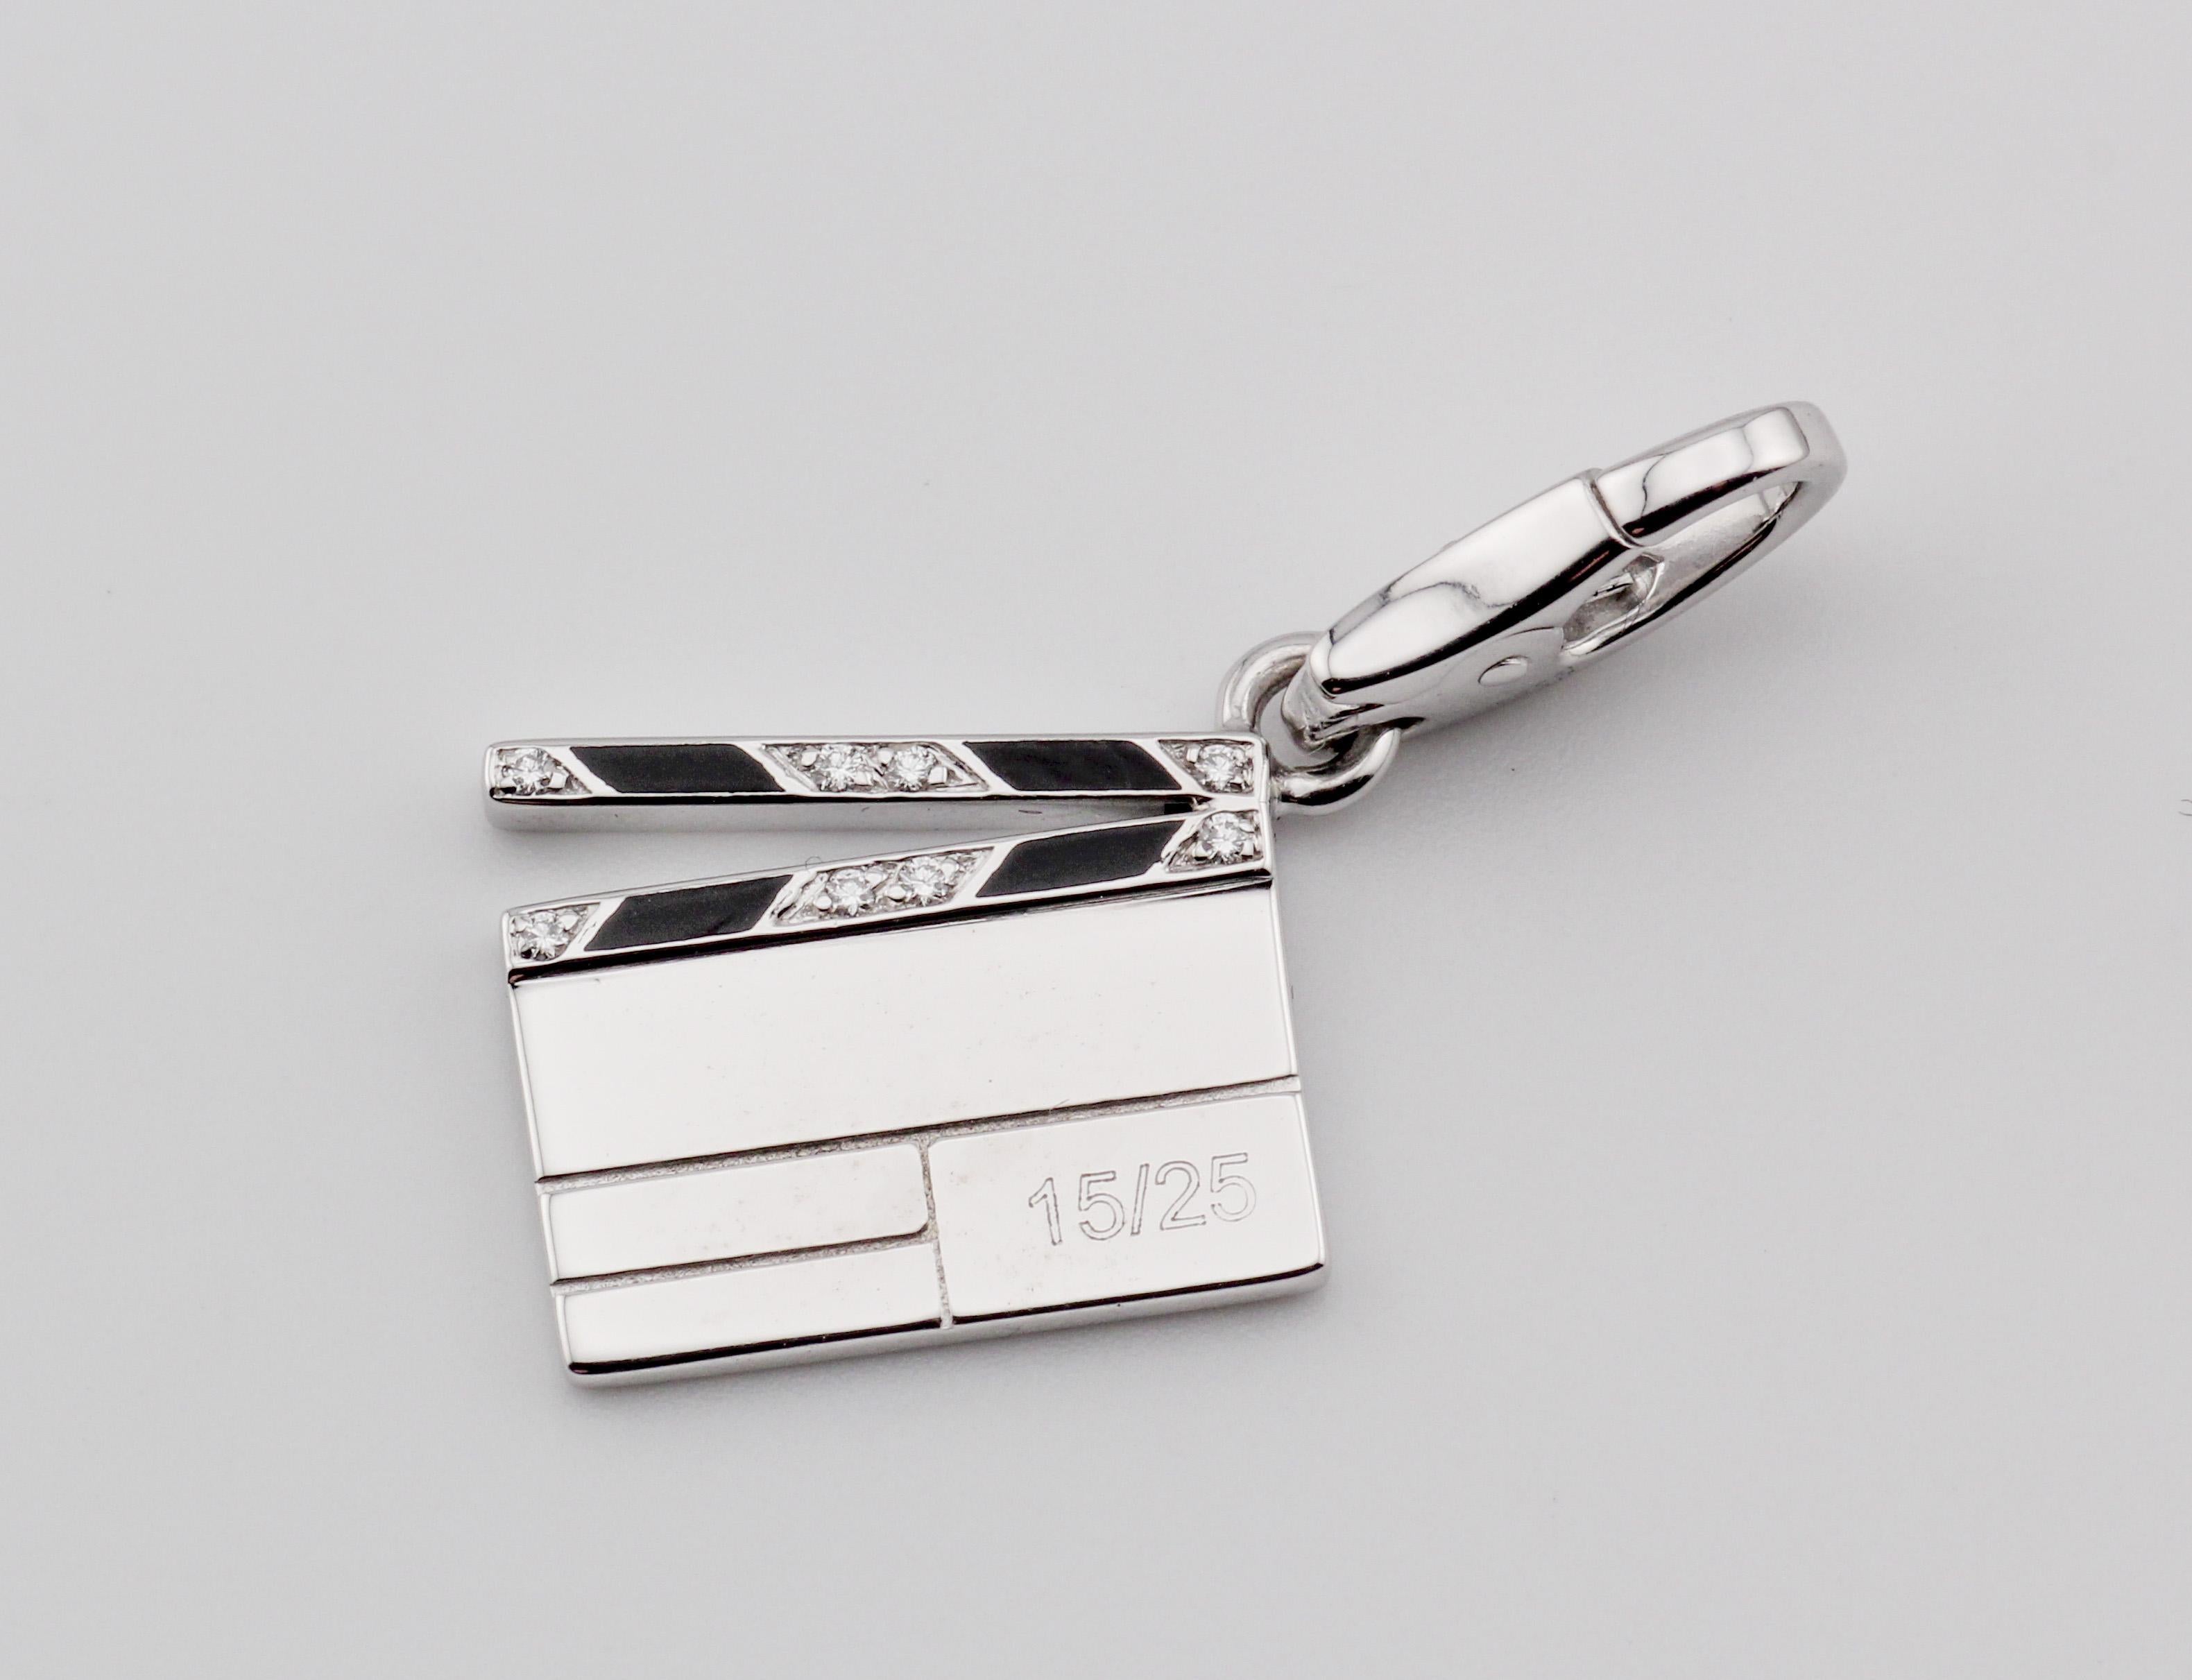 Indulge in the epitome of luxury and cinematic charm with the Cartier Diamond 18K White Gold Enamel Limited Edition Clapperboard Charm Pendant. Crafted by the iconic French jeweler Cartier, this pendant is a masterpiece that harmonizes exquisite